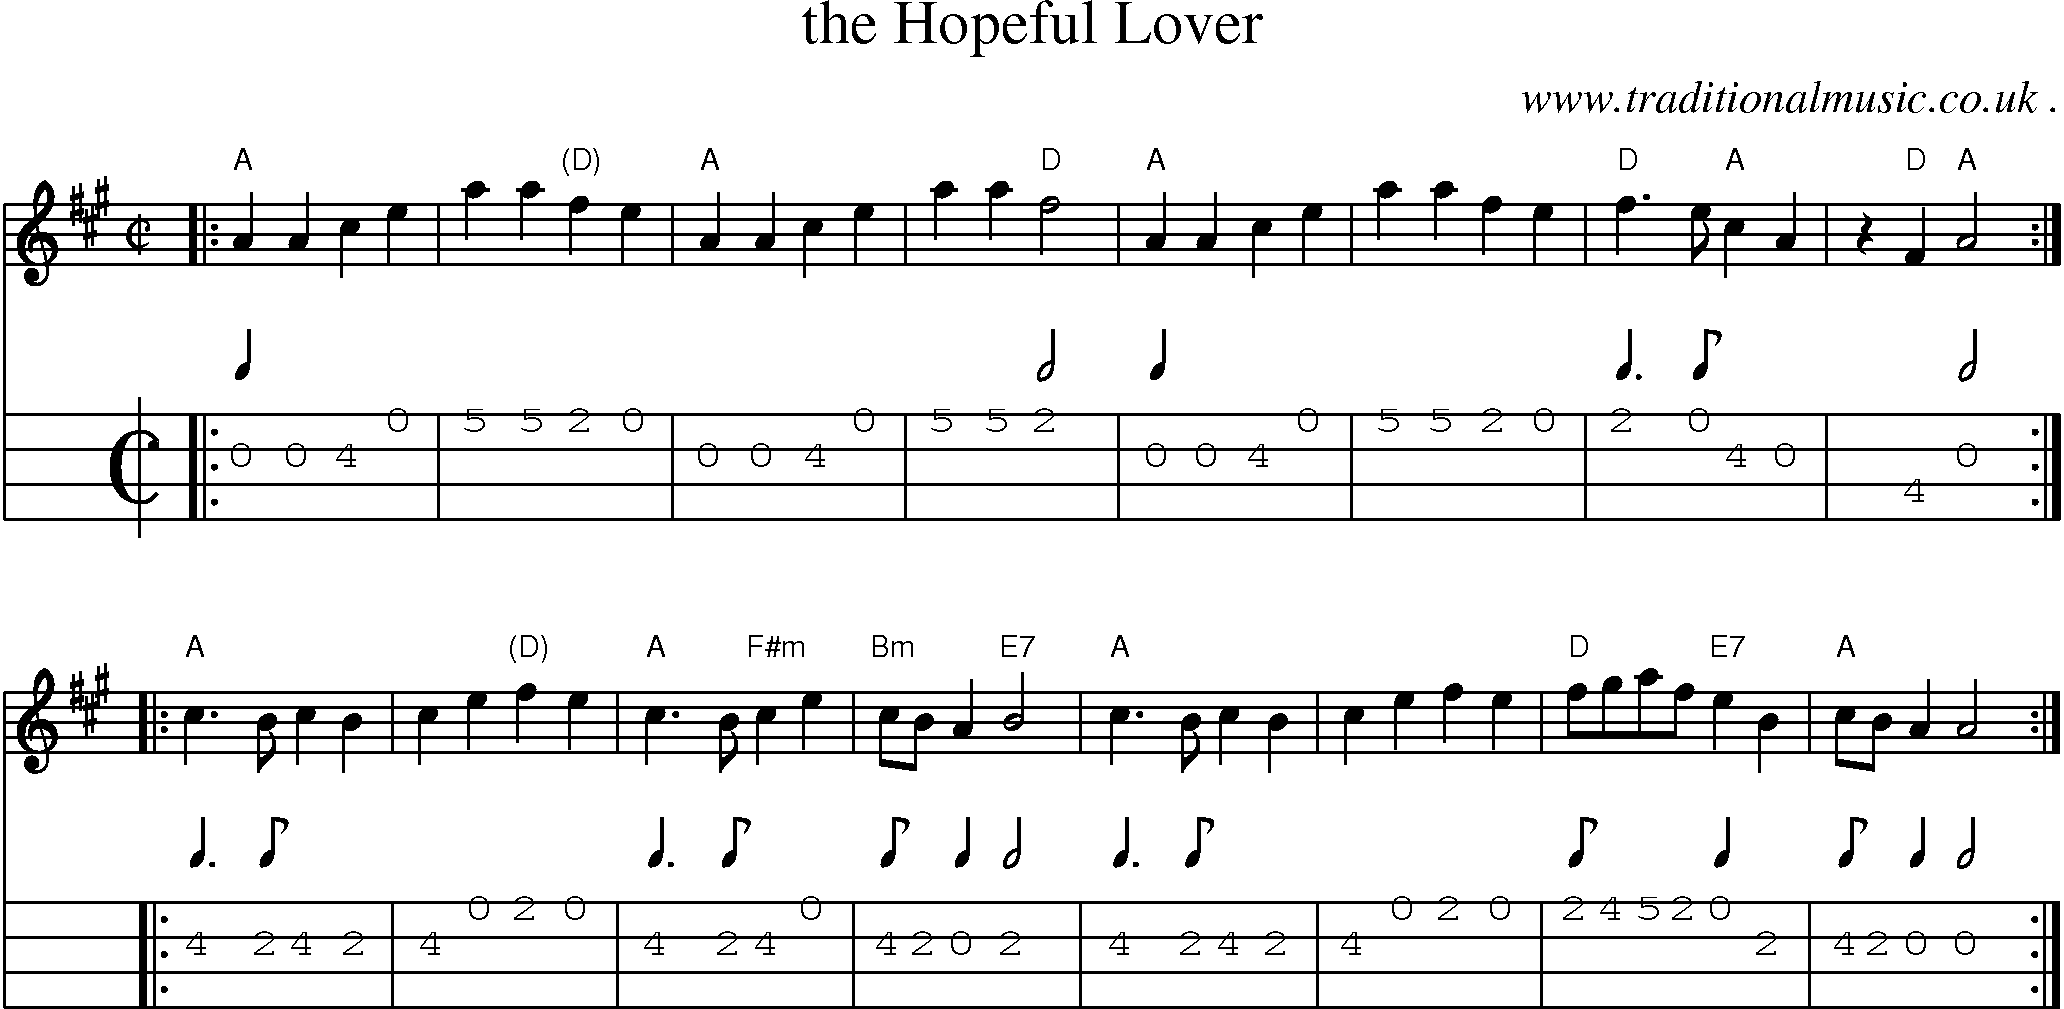 Sheet-music  score, Chords and Mandolin Tabs for The Hopeful Lover